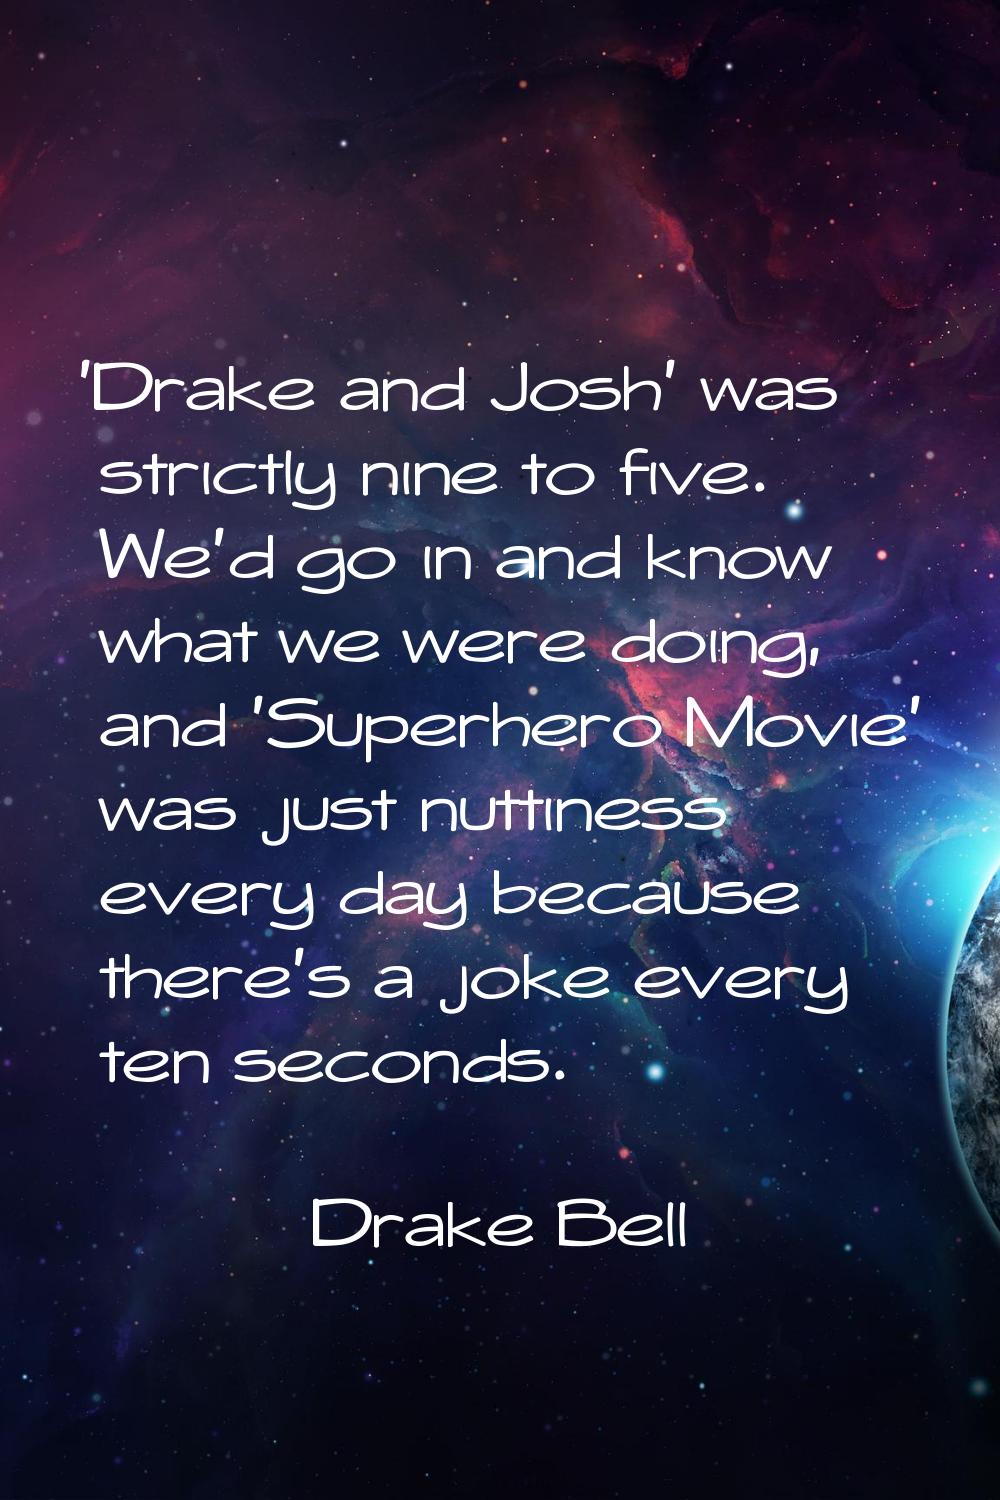 'Drake and Josh' was strictly nine to five. We'd go in and know what we were doing, and 'Superhero 